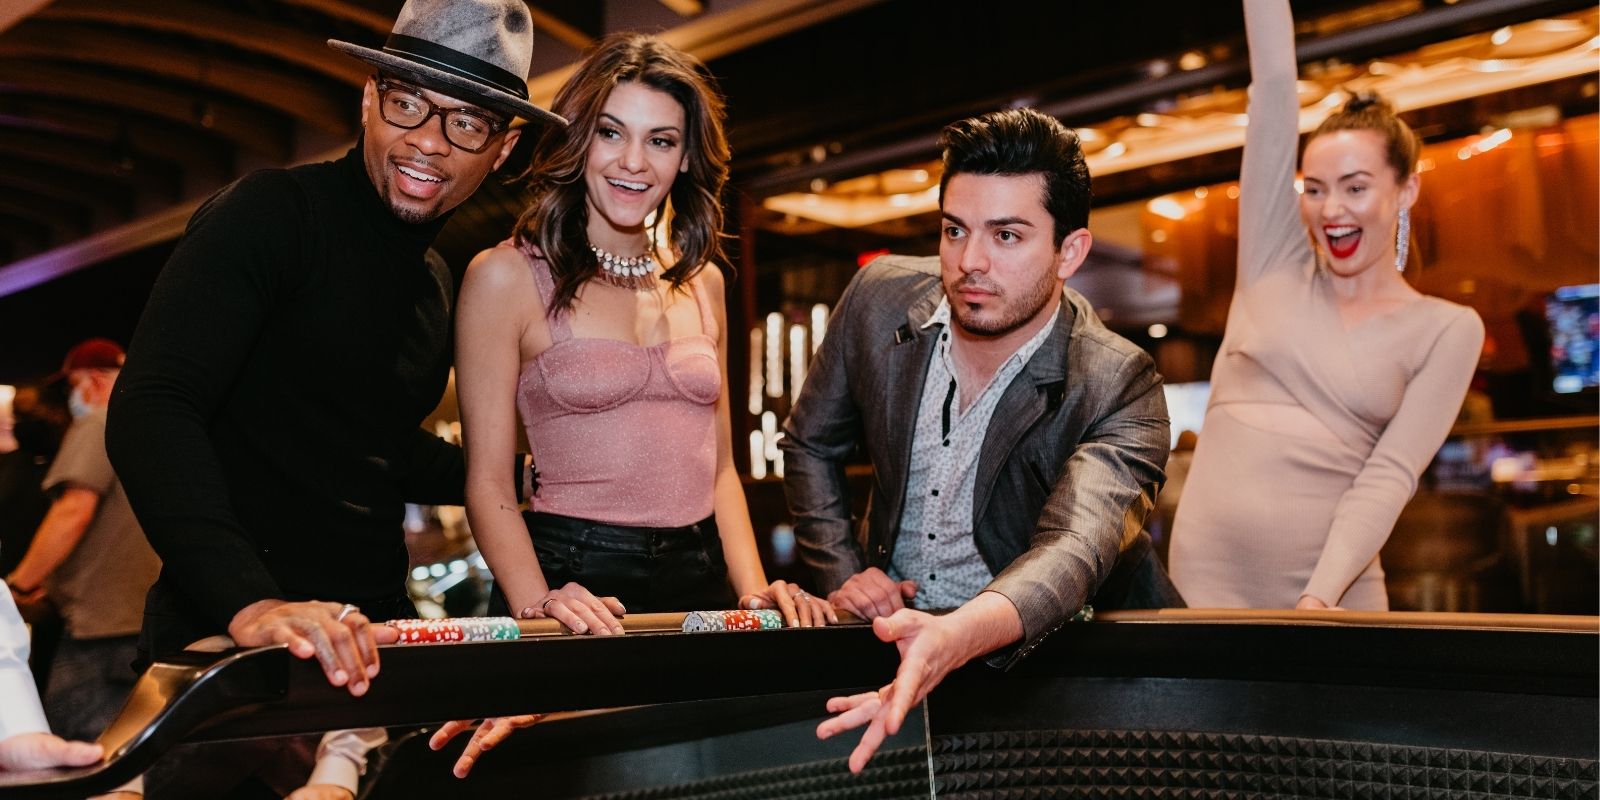 Four people standing around a craps table. One guy is throwing his dice to play while his 3 friends watch. One girl is celebrating with her right arm raised to the roof. Night time casino vibes.